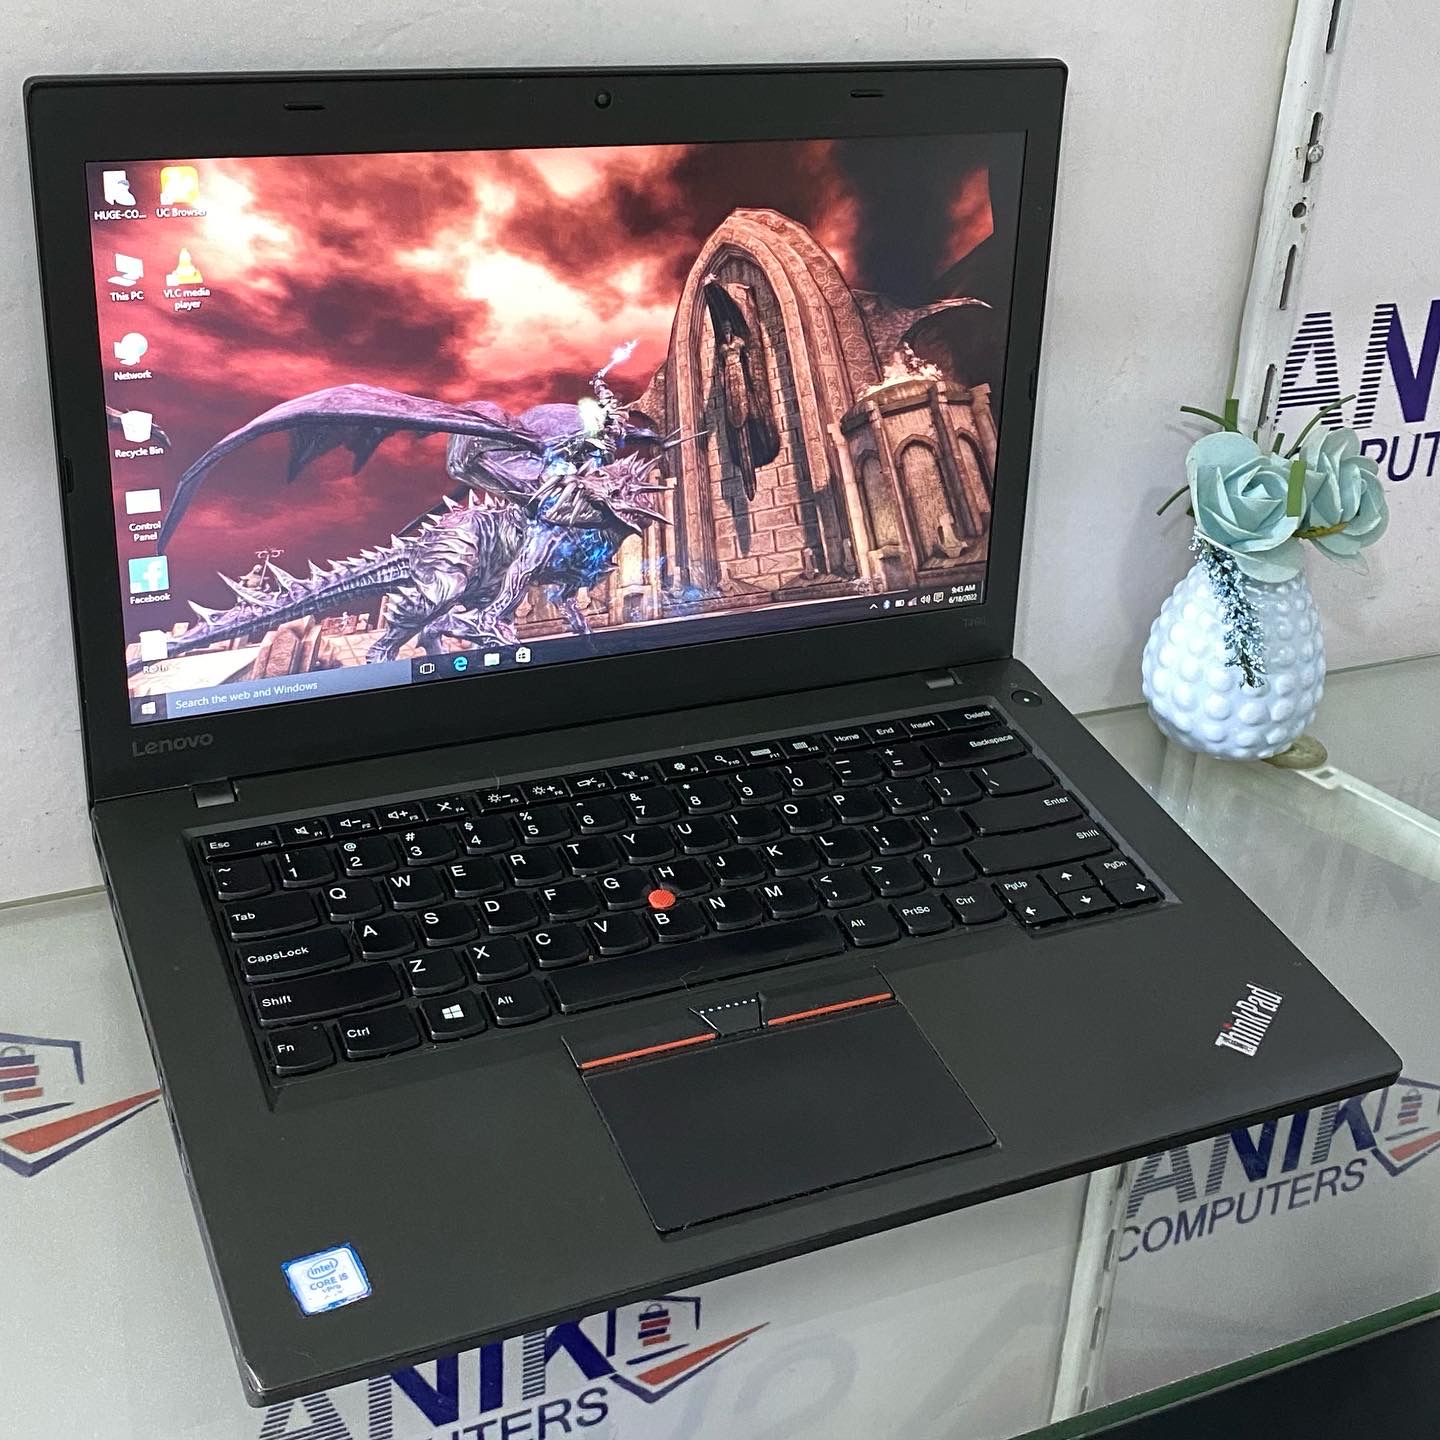 Lenovo Thinkpad T460 Ultrabook gaming and graphics Laptop Computer